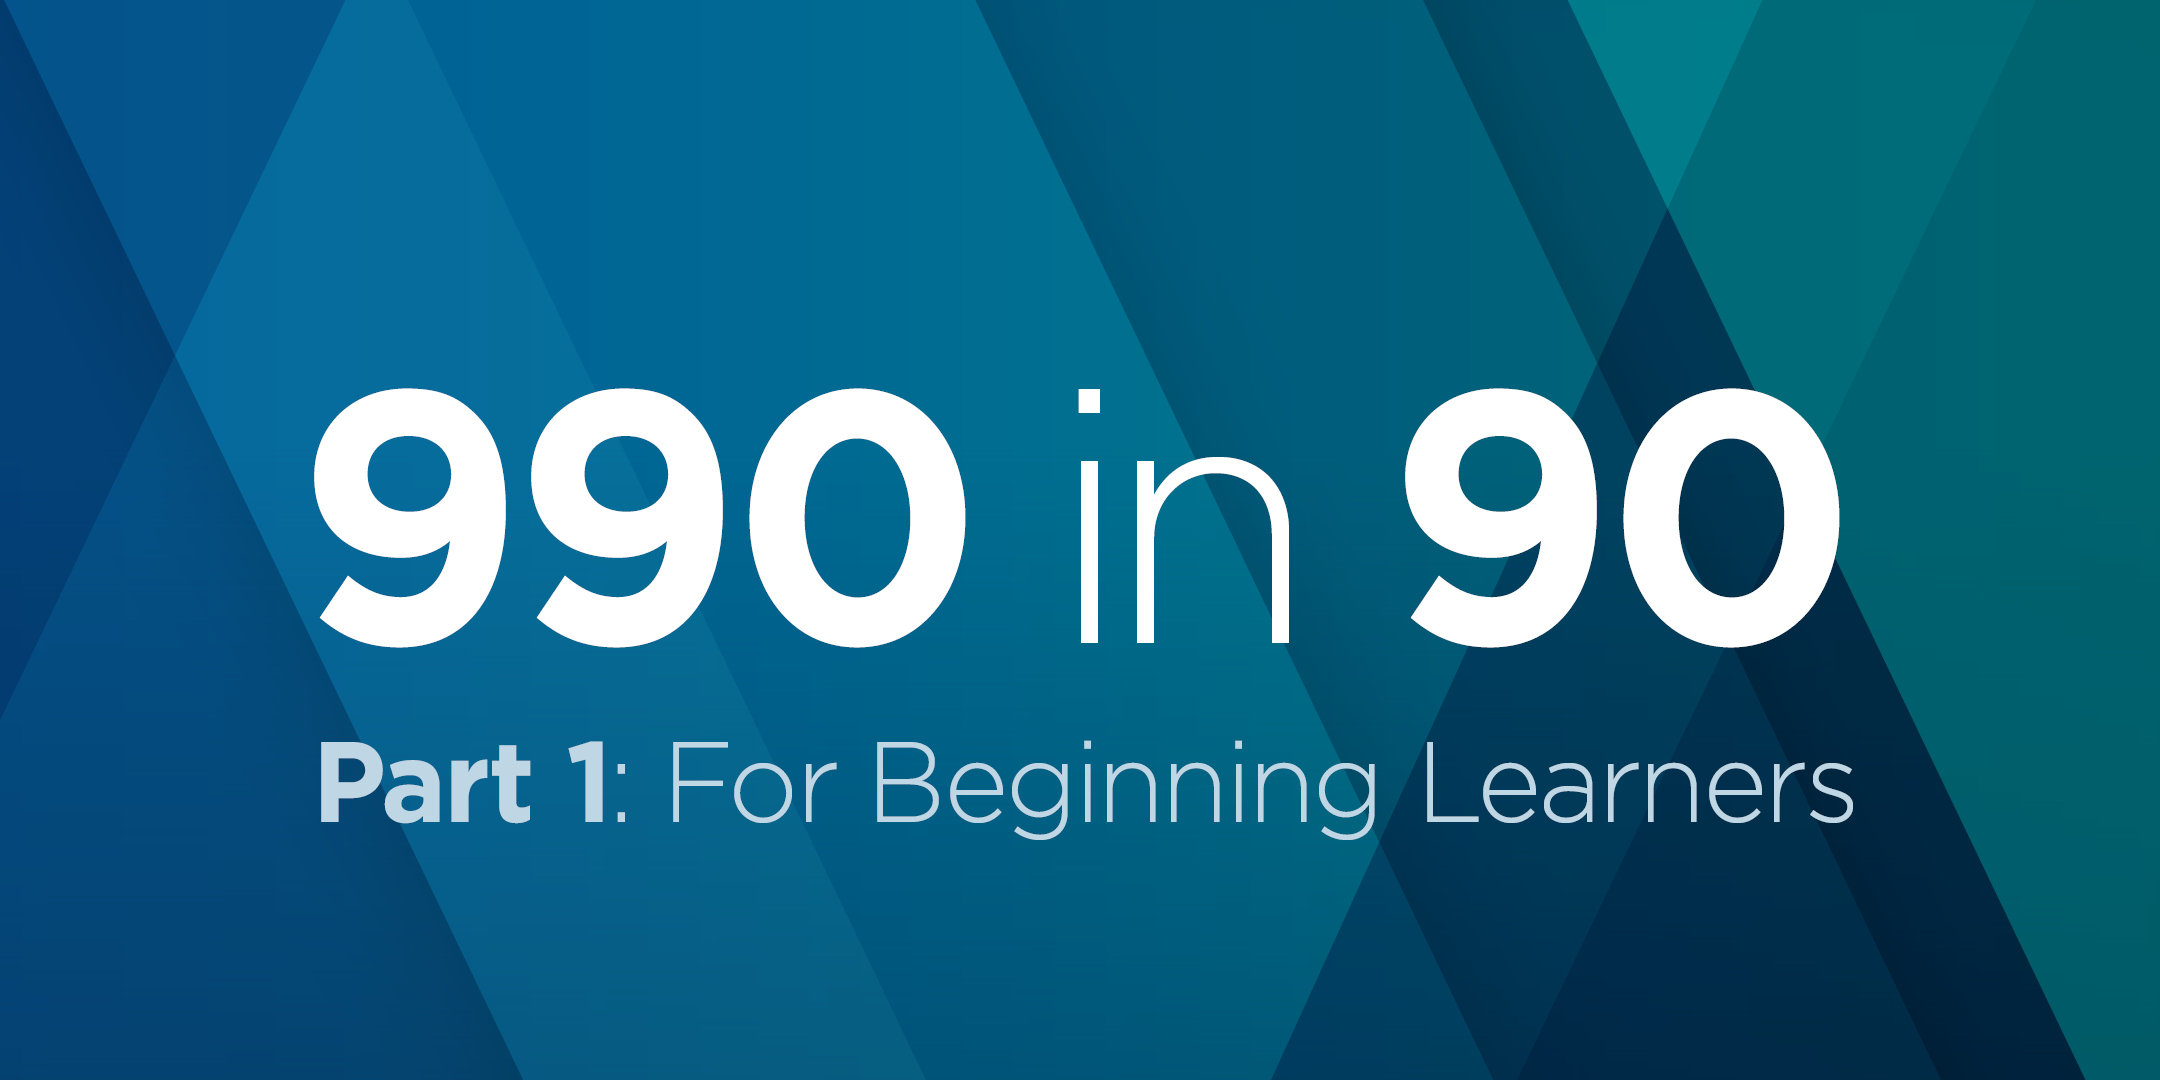 990 in 90 Part 1: For Beginning Learners